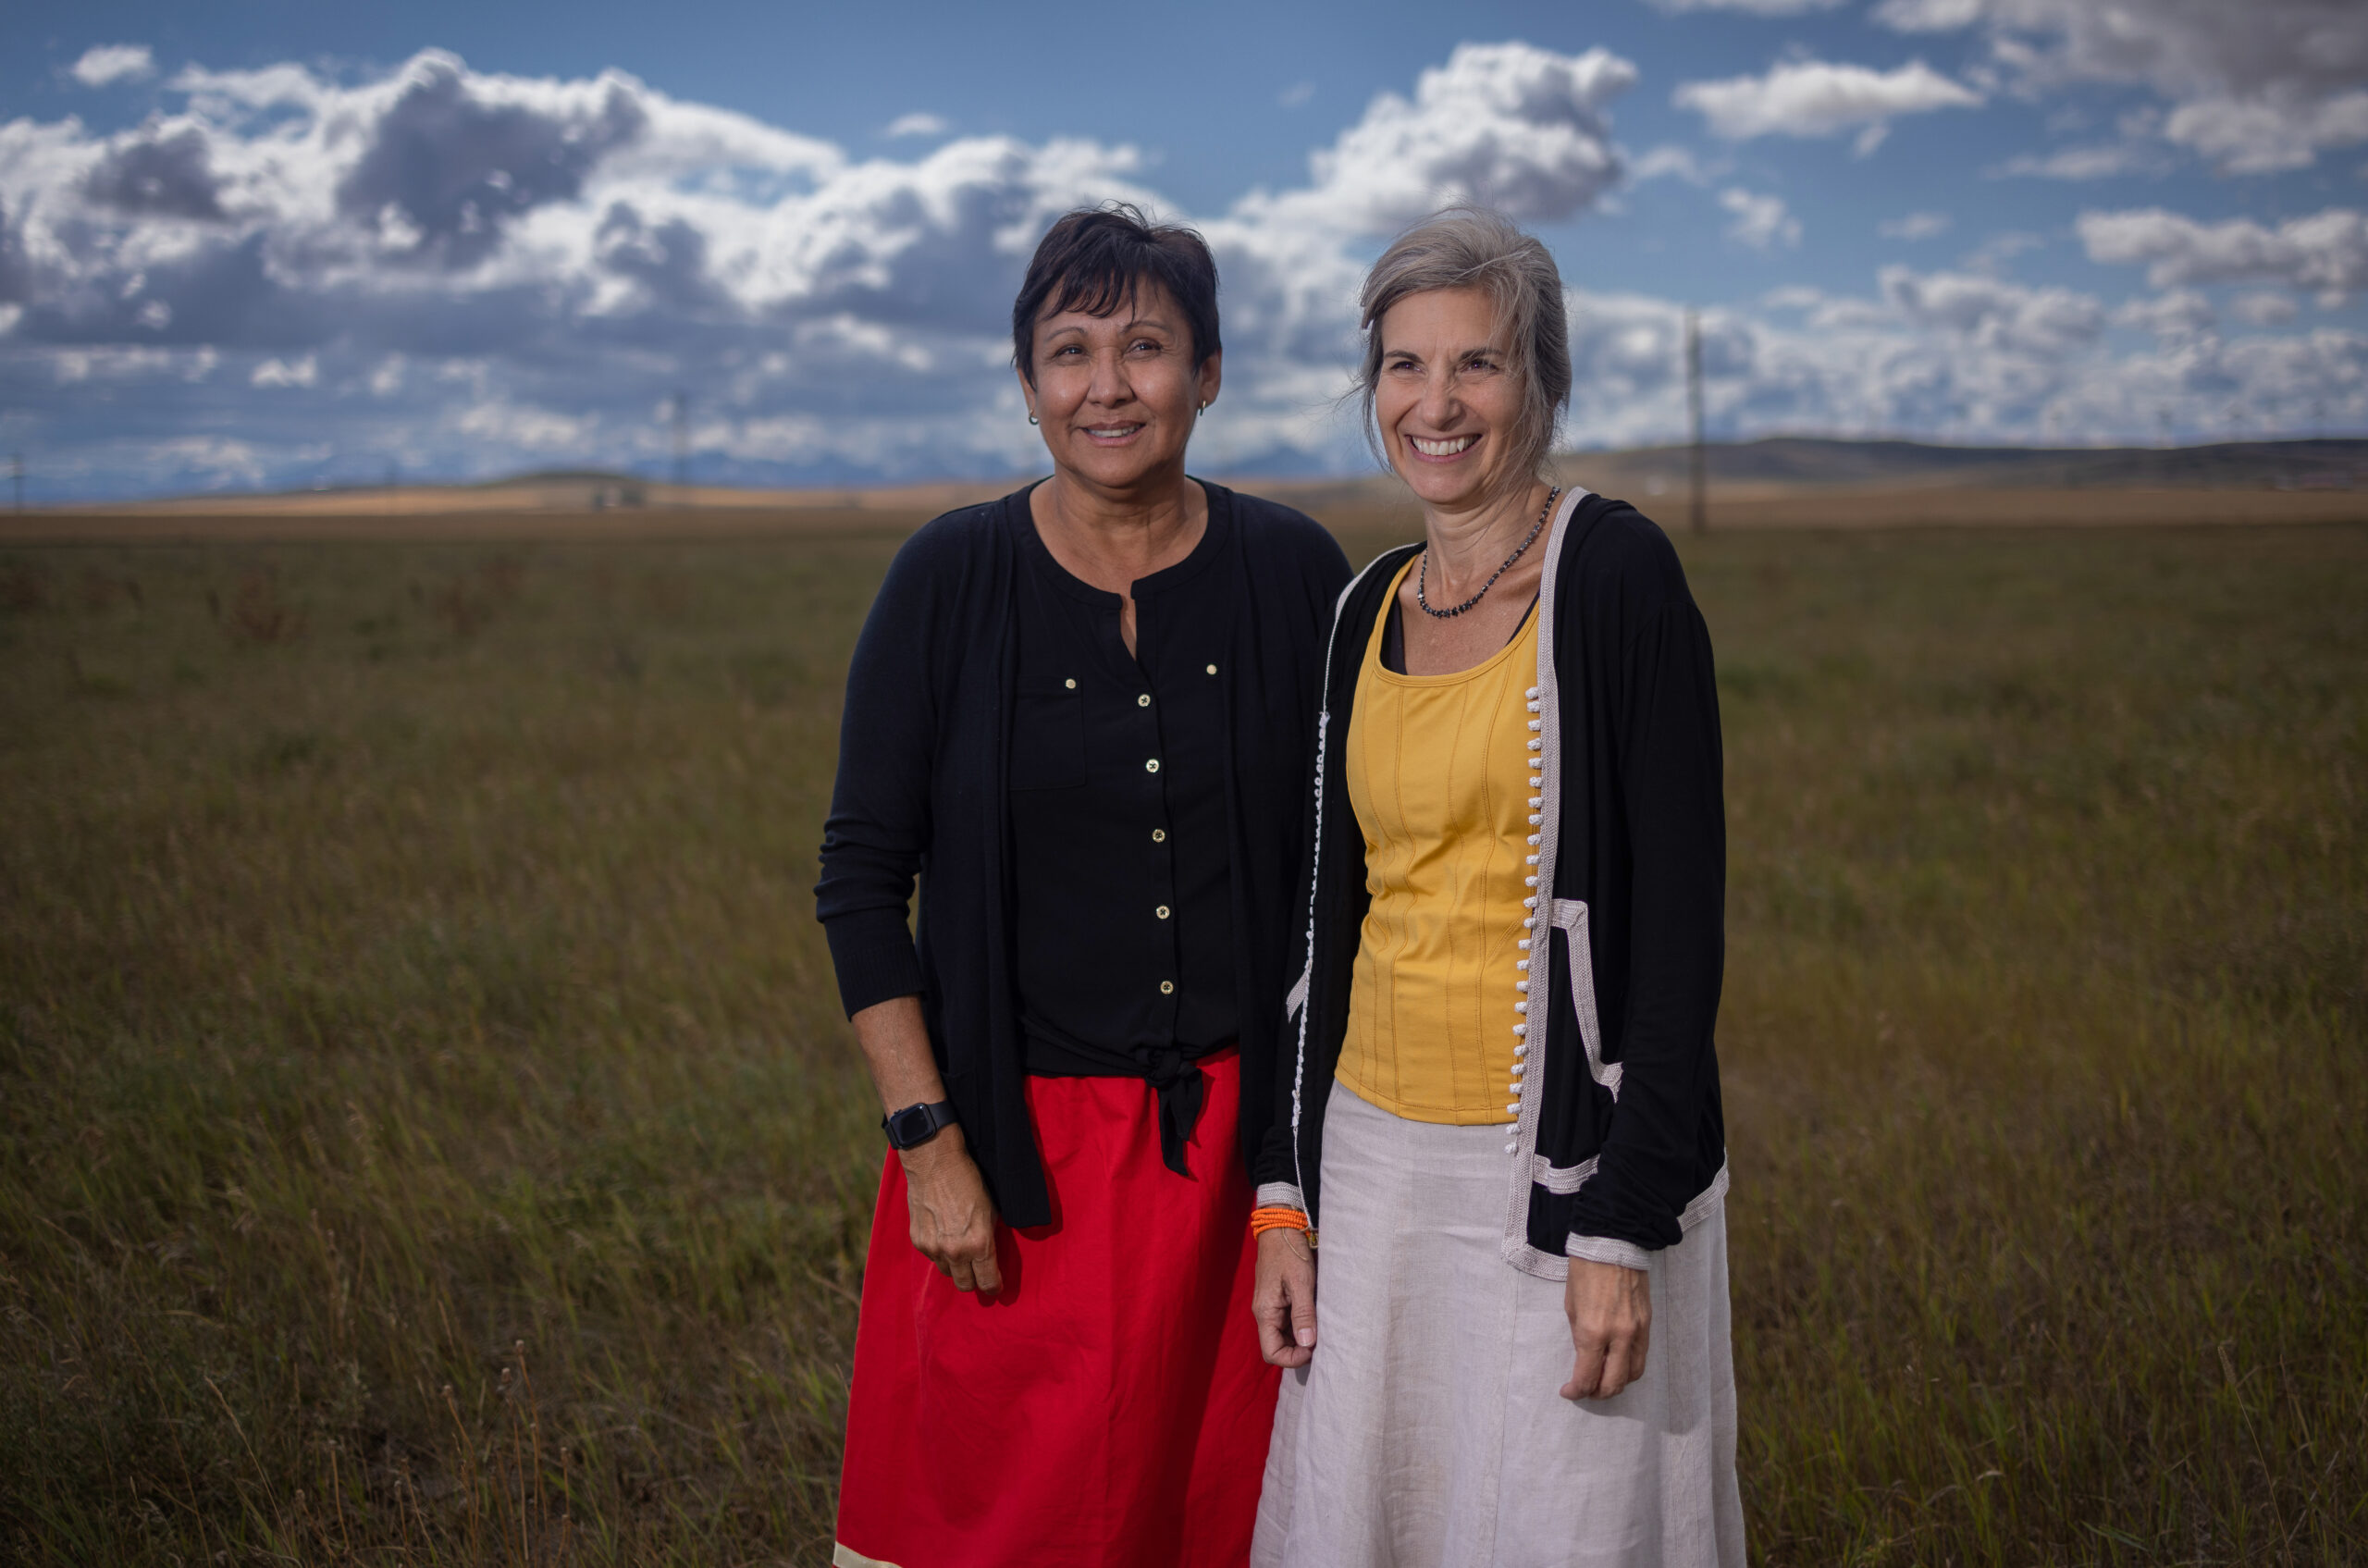 Noreen Plain Eagle, manager of Piikani Lands , left and Laura Lynes, president of The Resilience Institute.